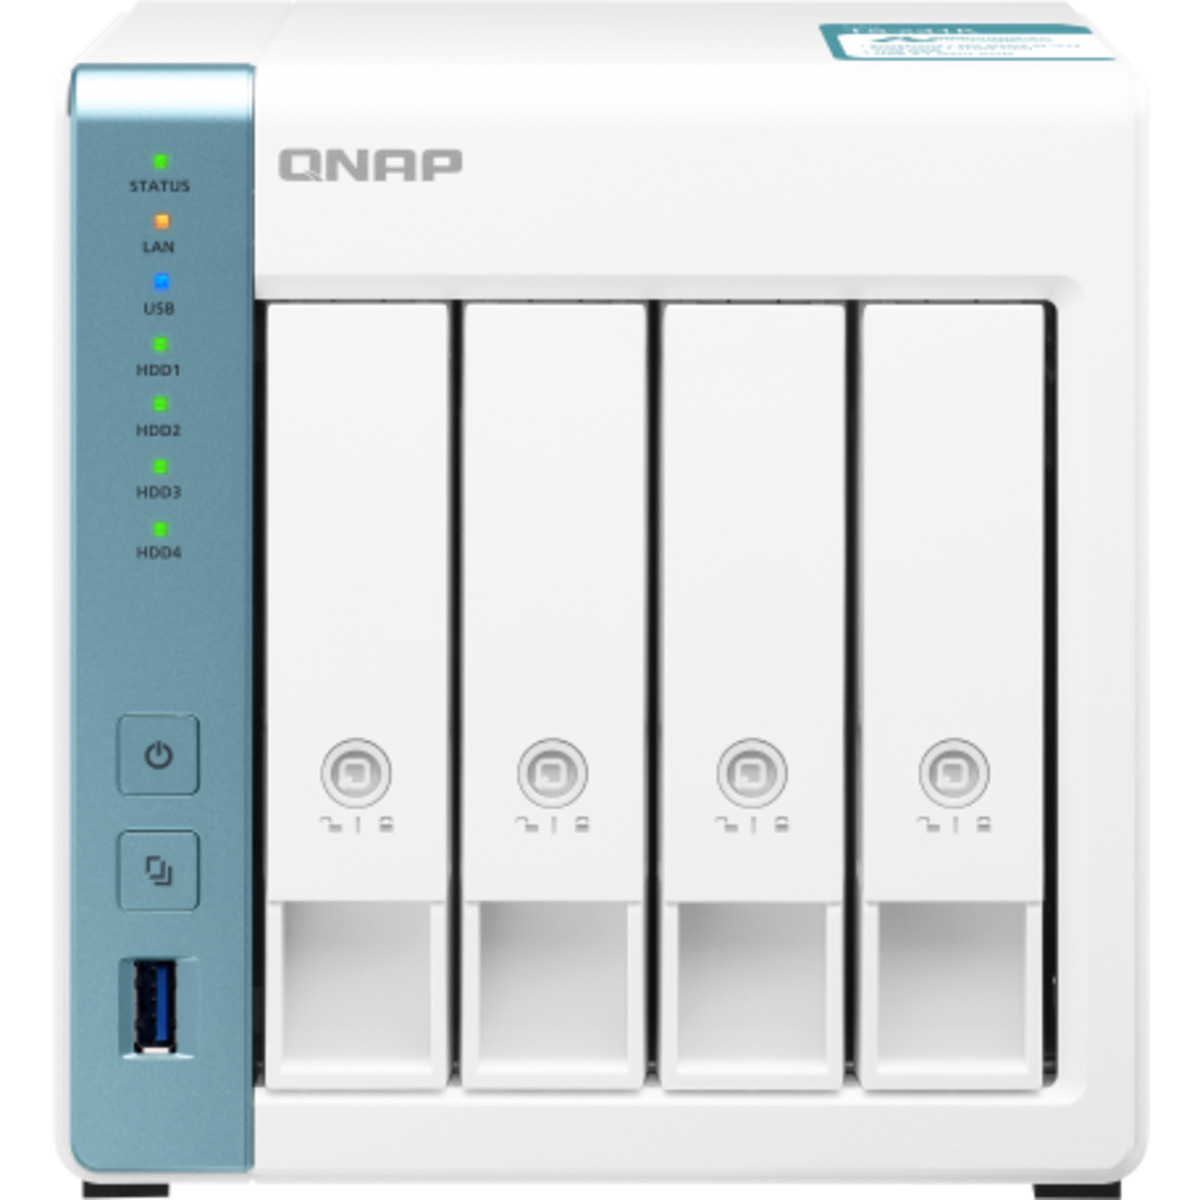 buy $844 QNAP TS-431K 16tb Desktop NAS - Network Attached Storage Device 4x4000gb Western Digital Blue WD40EZRZ 3.5 5400rpm SATA 6Gb/s HDD CONSUMER Class Drives Installed - Burn-In Tested - nas headquarters buy network attached storage server device das new raid-5 free shipping usa christmas new year holiday sale TS-431K